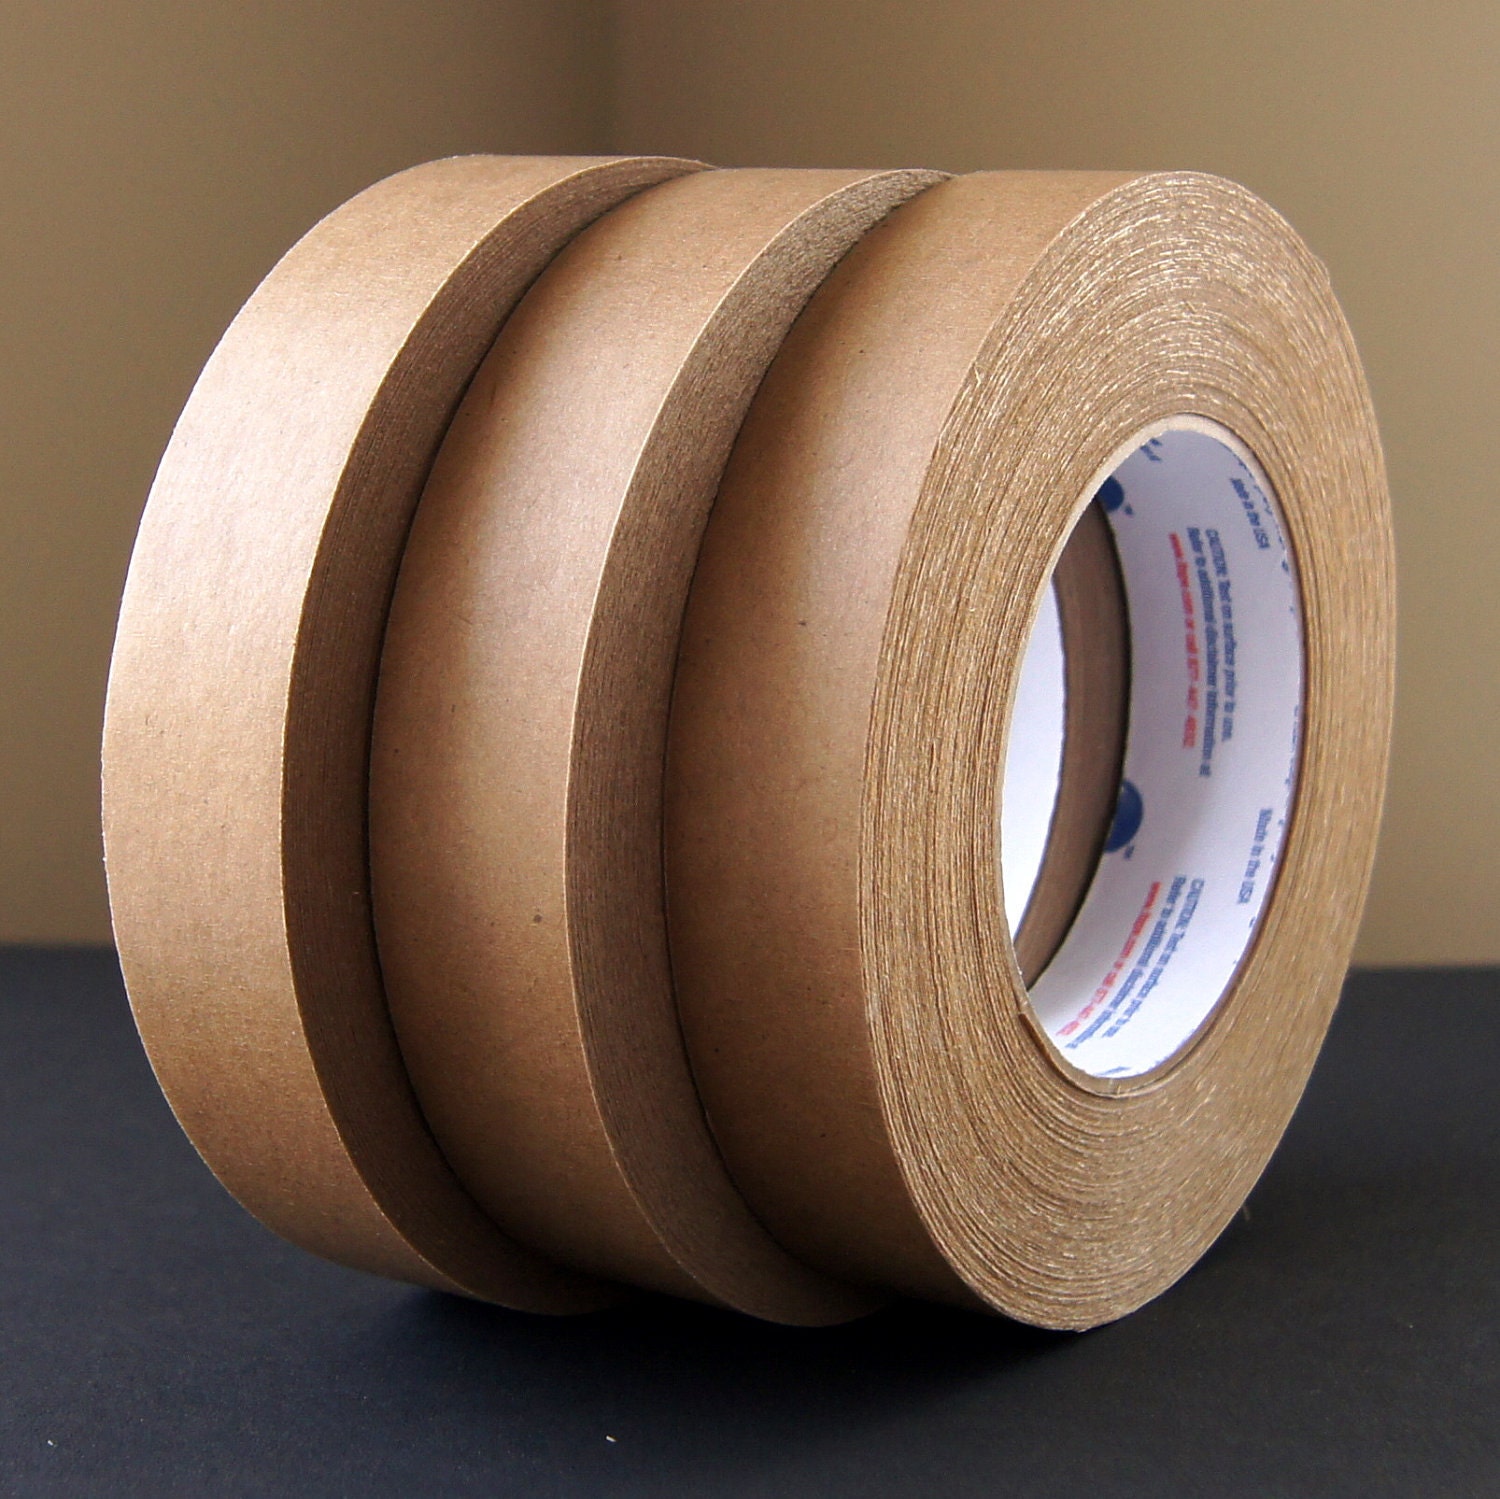 gaffer's tape > duct tape : r/geek